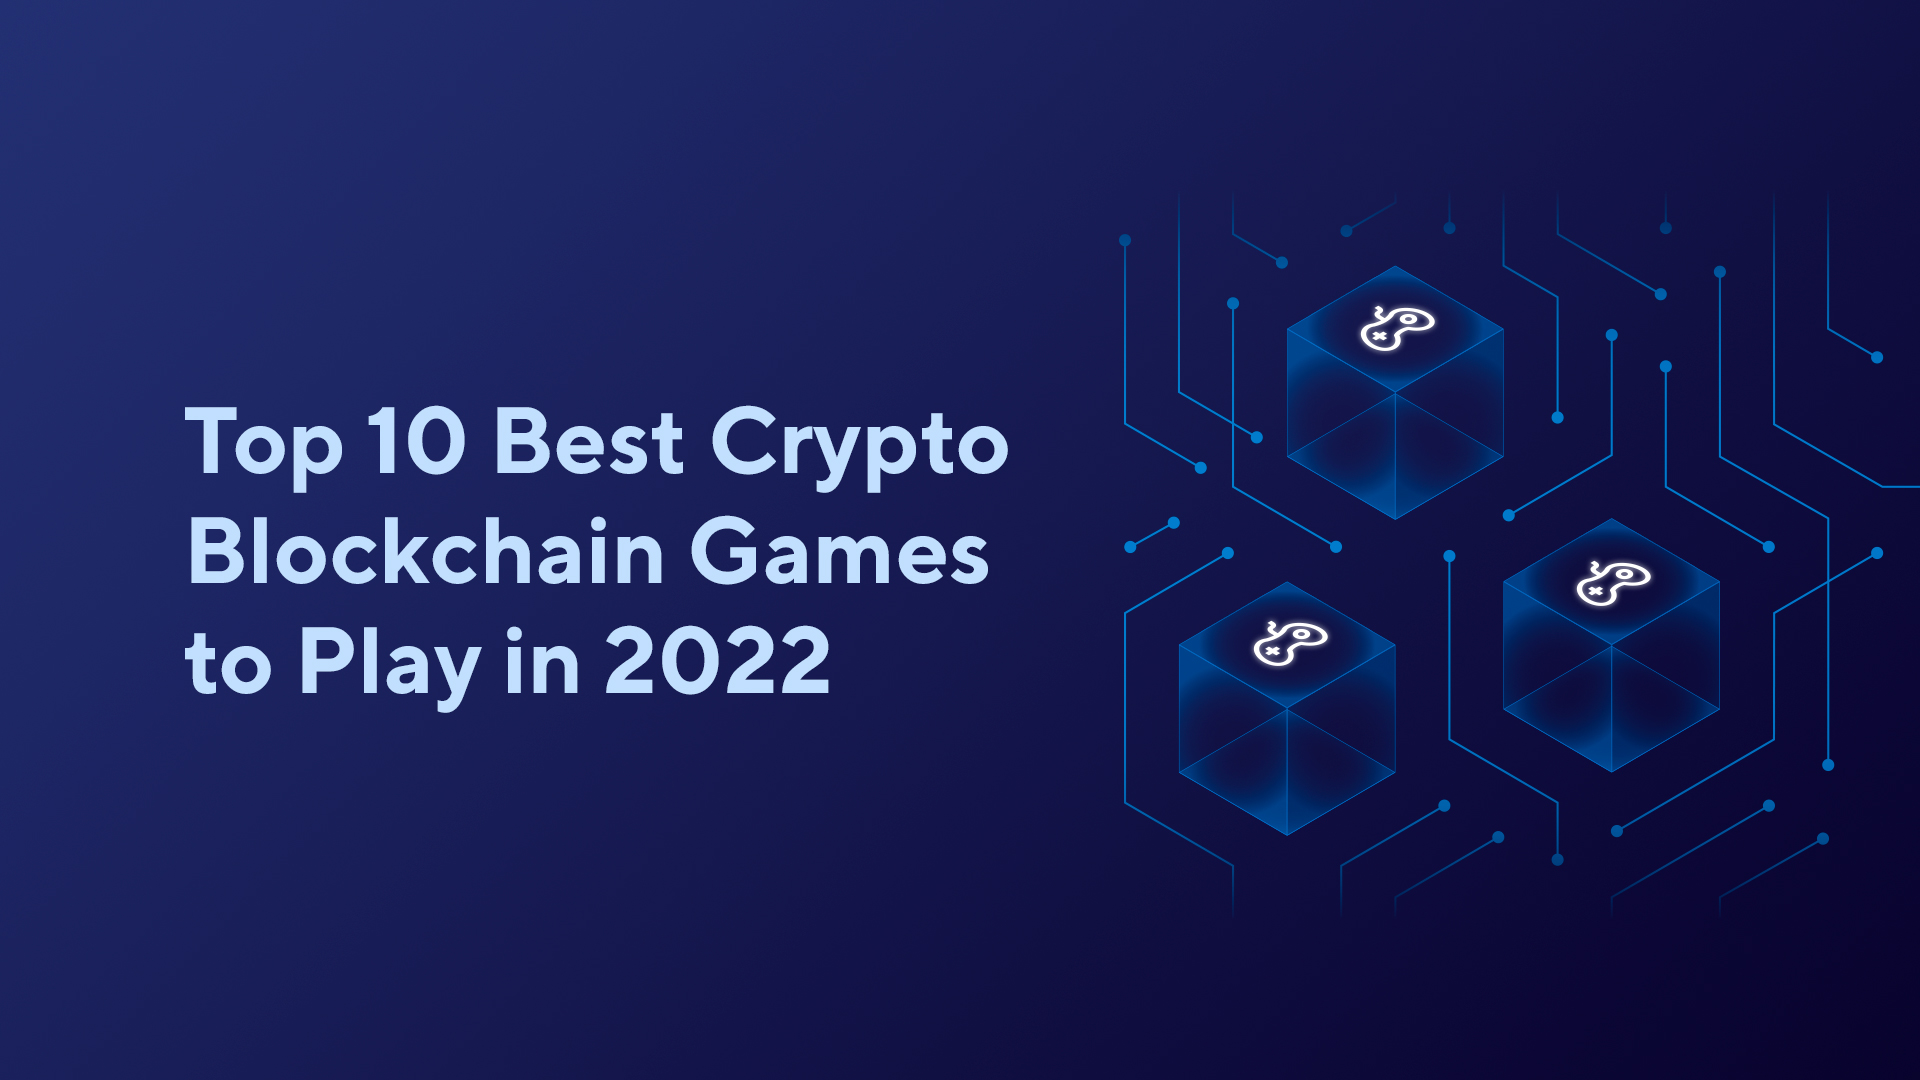 Top 10 Best Cryptocurrency Blockchain Games to Play in 2022